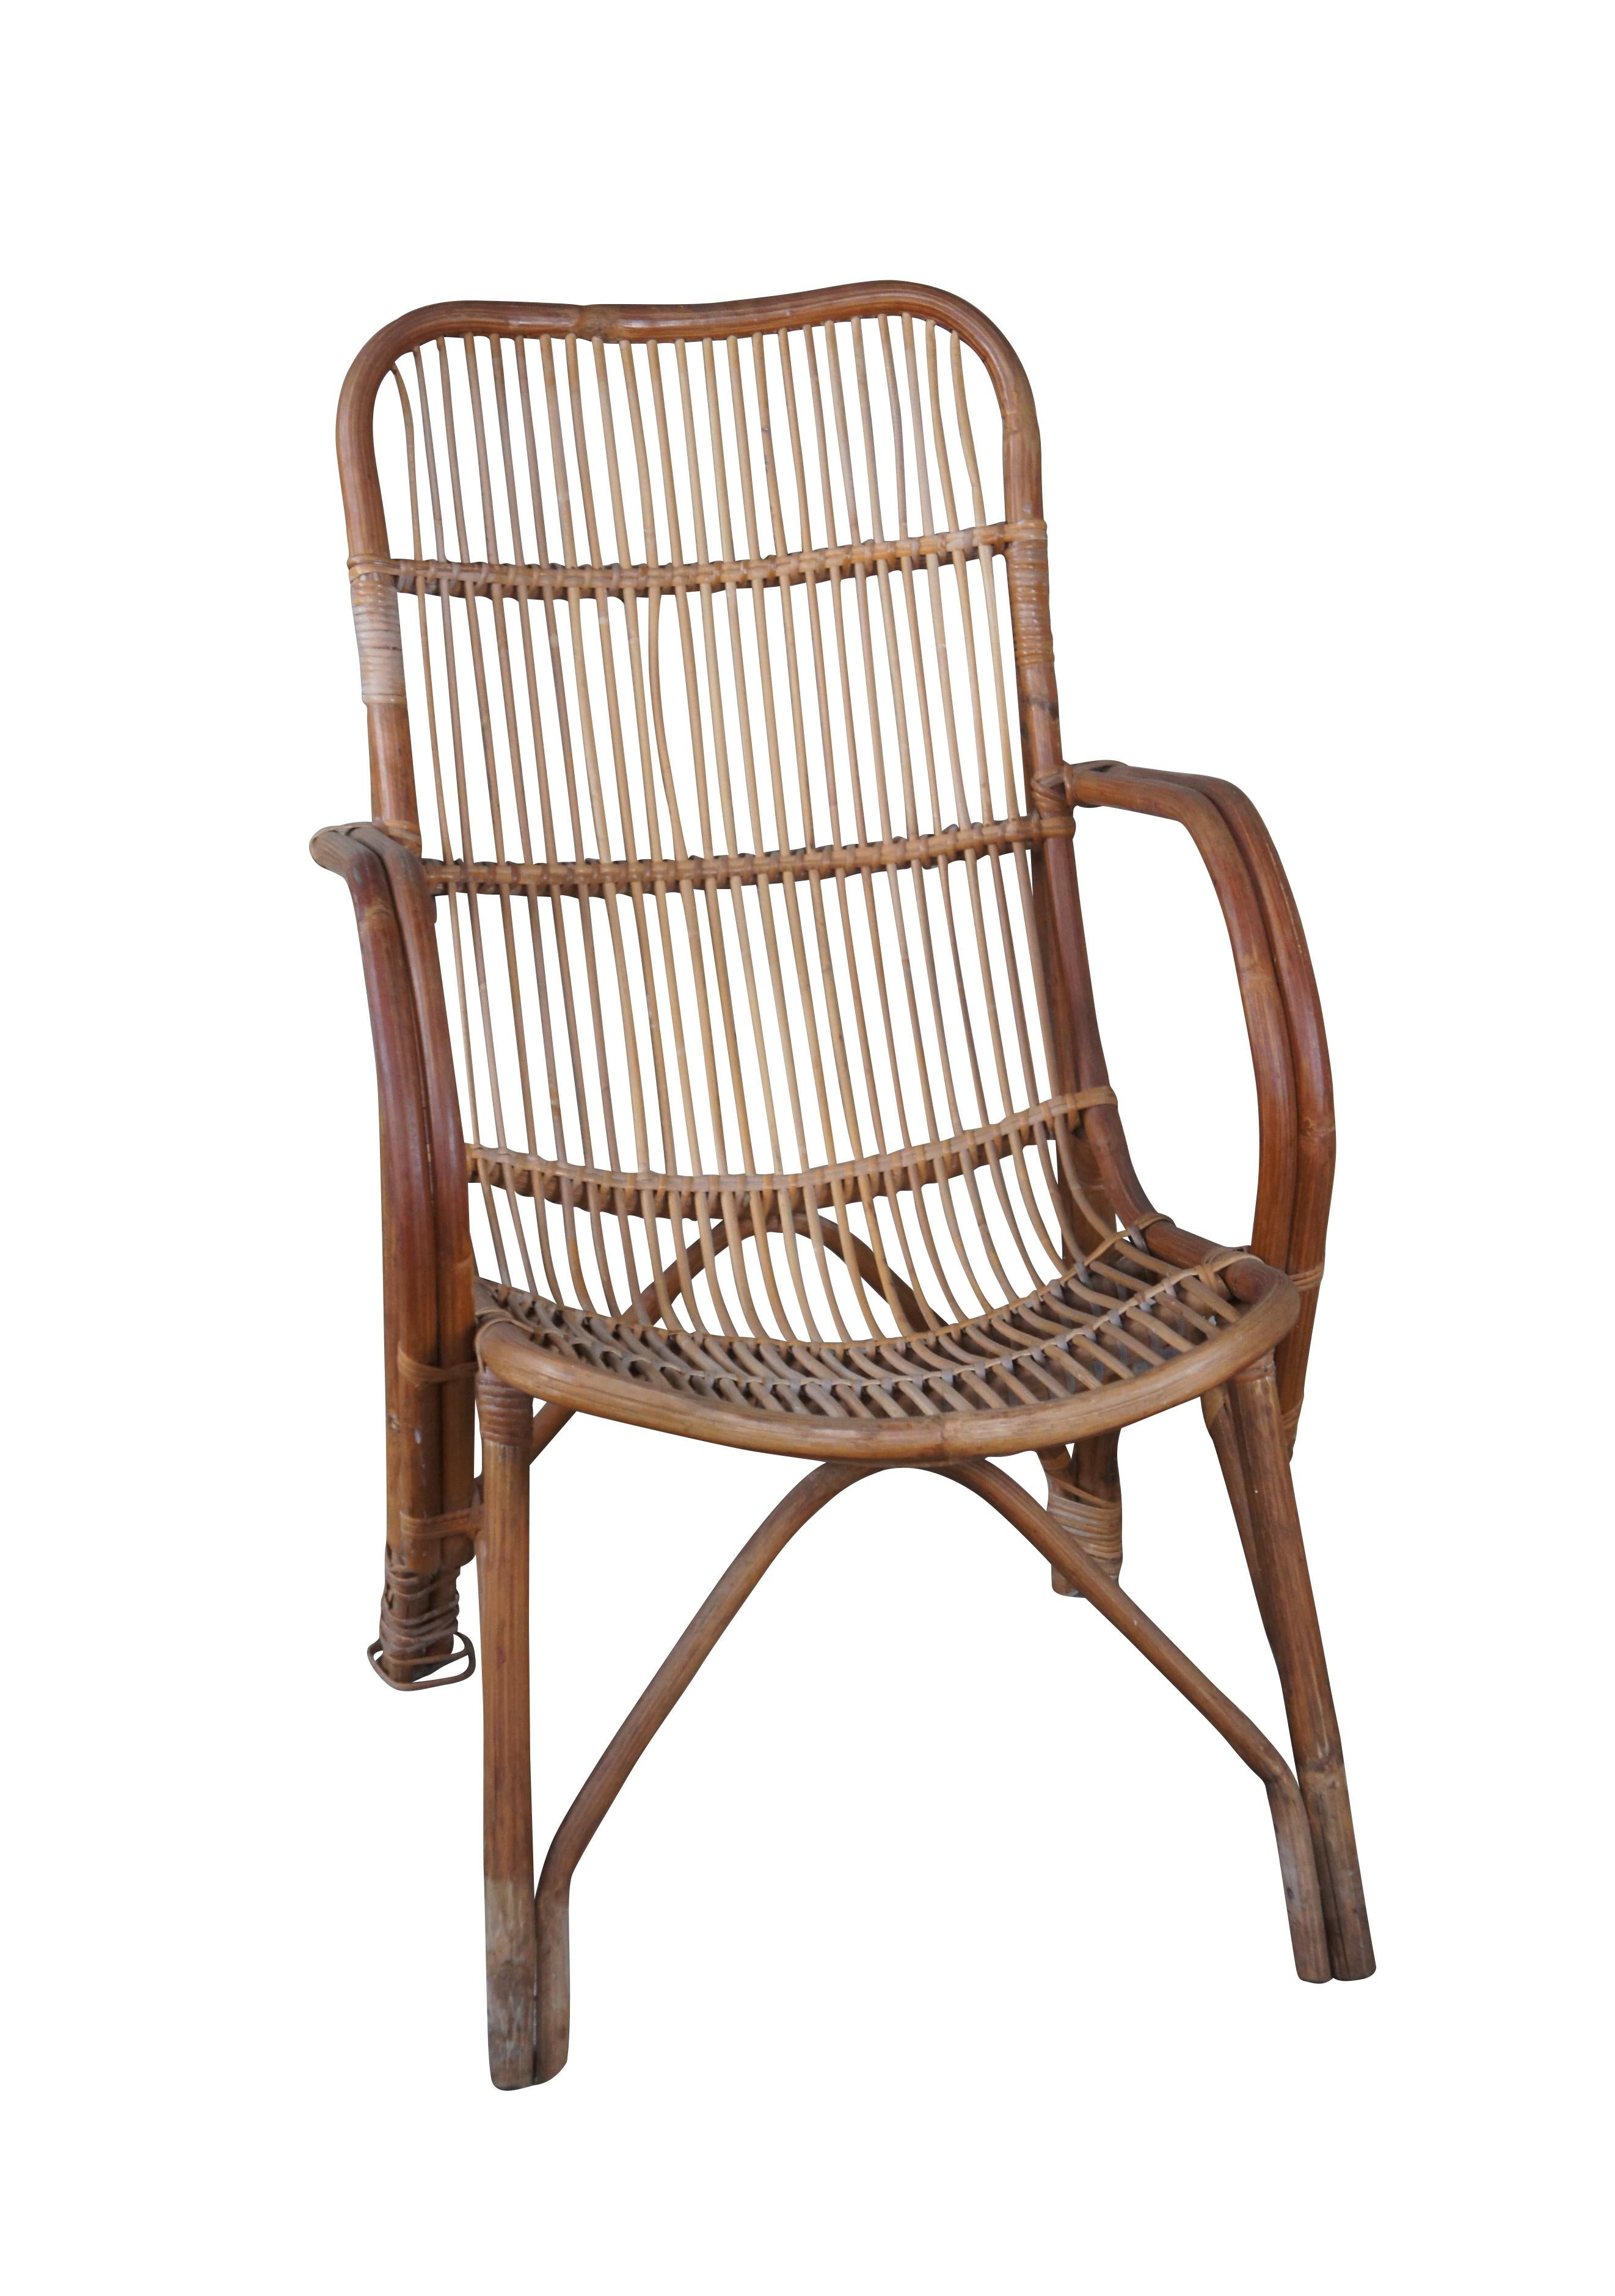 Bohemian bentwood armchair made from bamboo with rattan accents, circa 1970s. Its modern form with bring a pleasant feel to any space.